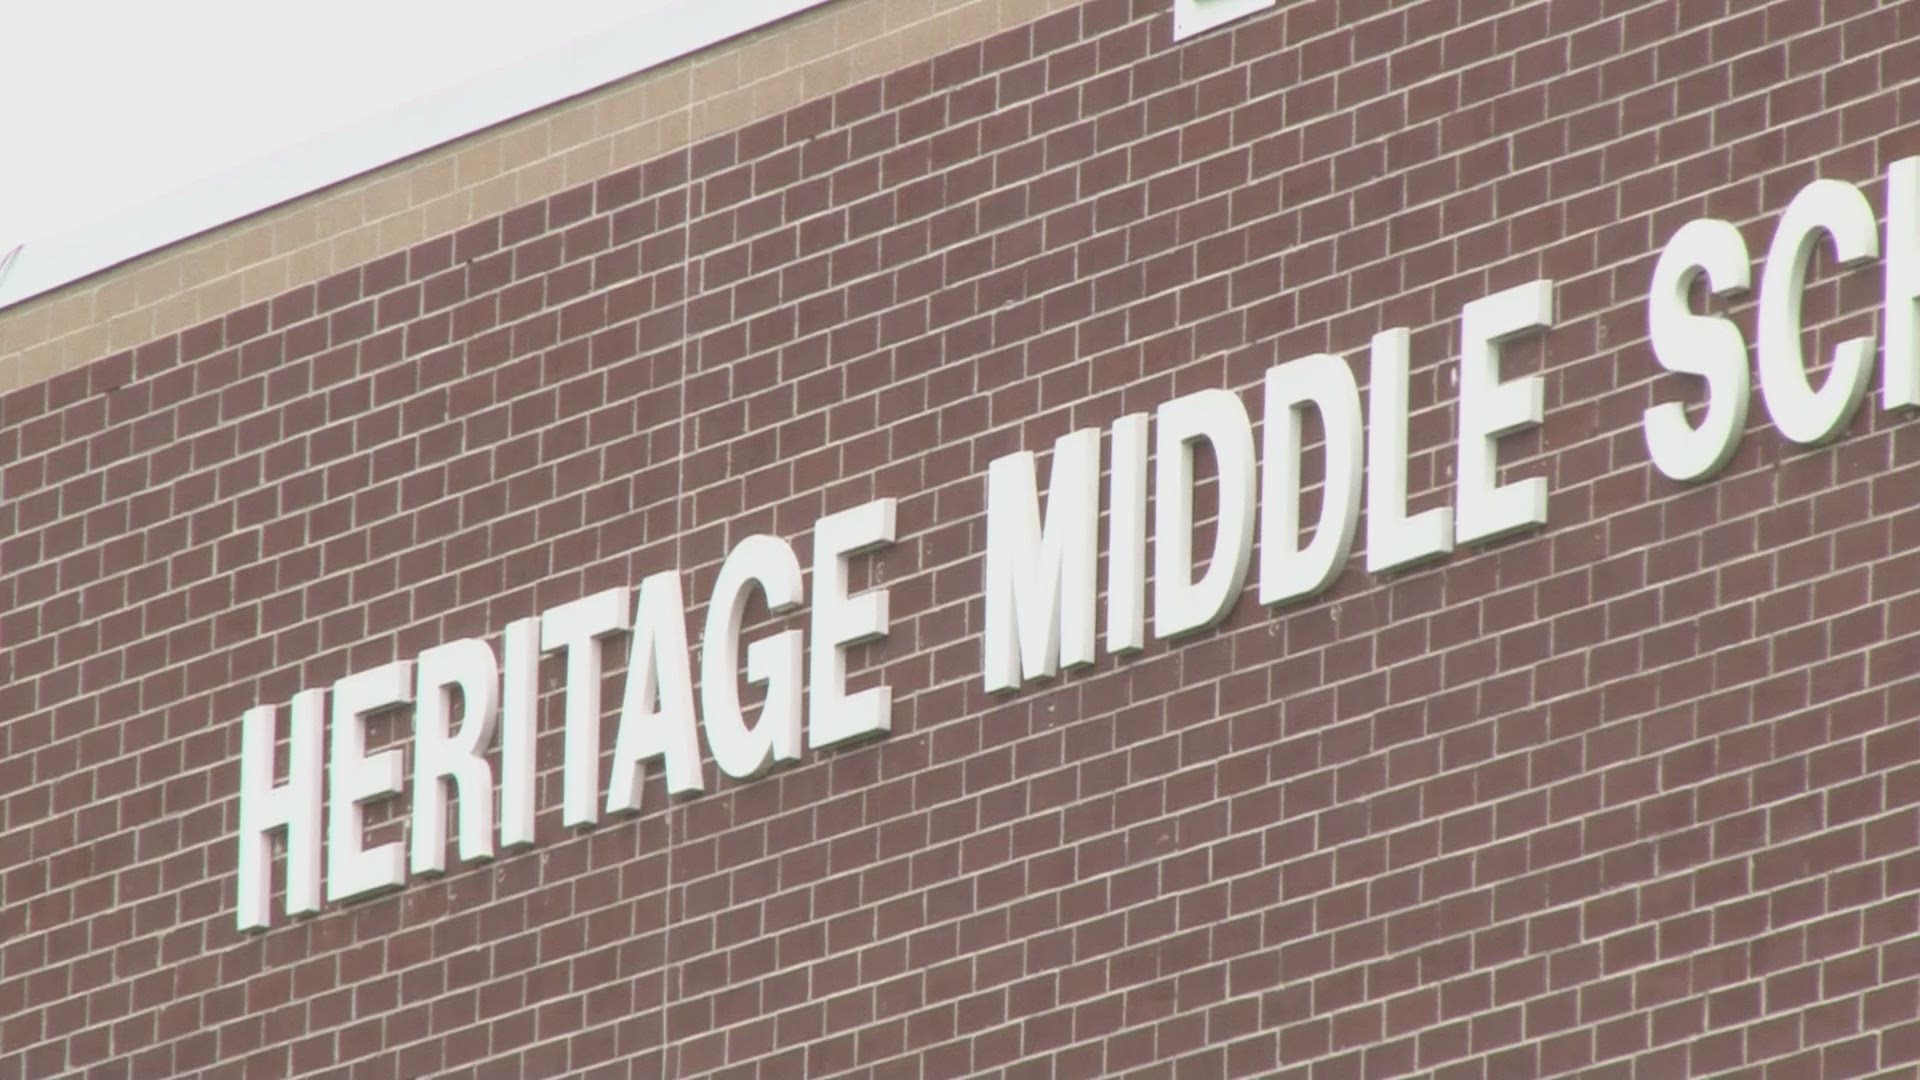 Deputies said there was a total of 7 or 8 fights in just two days at Heritage Middle School.